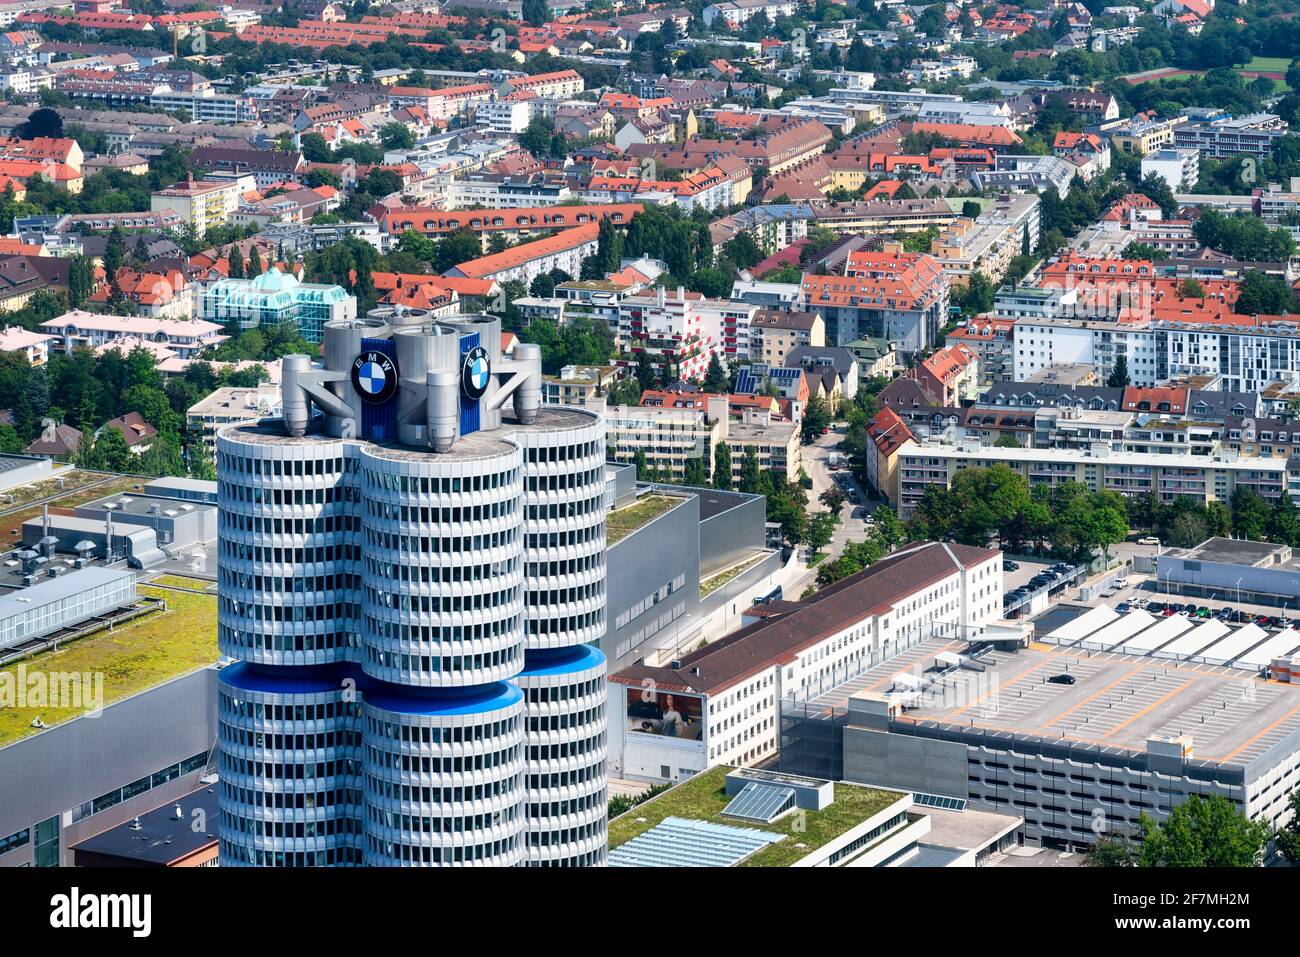 Munich, Germany, 08/24/2019: Aerial view of Munich with the BMW headquarters from the 291 m high Olympic tower (Olympiaturm). Stock Photo